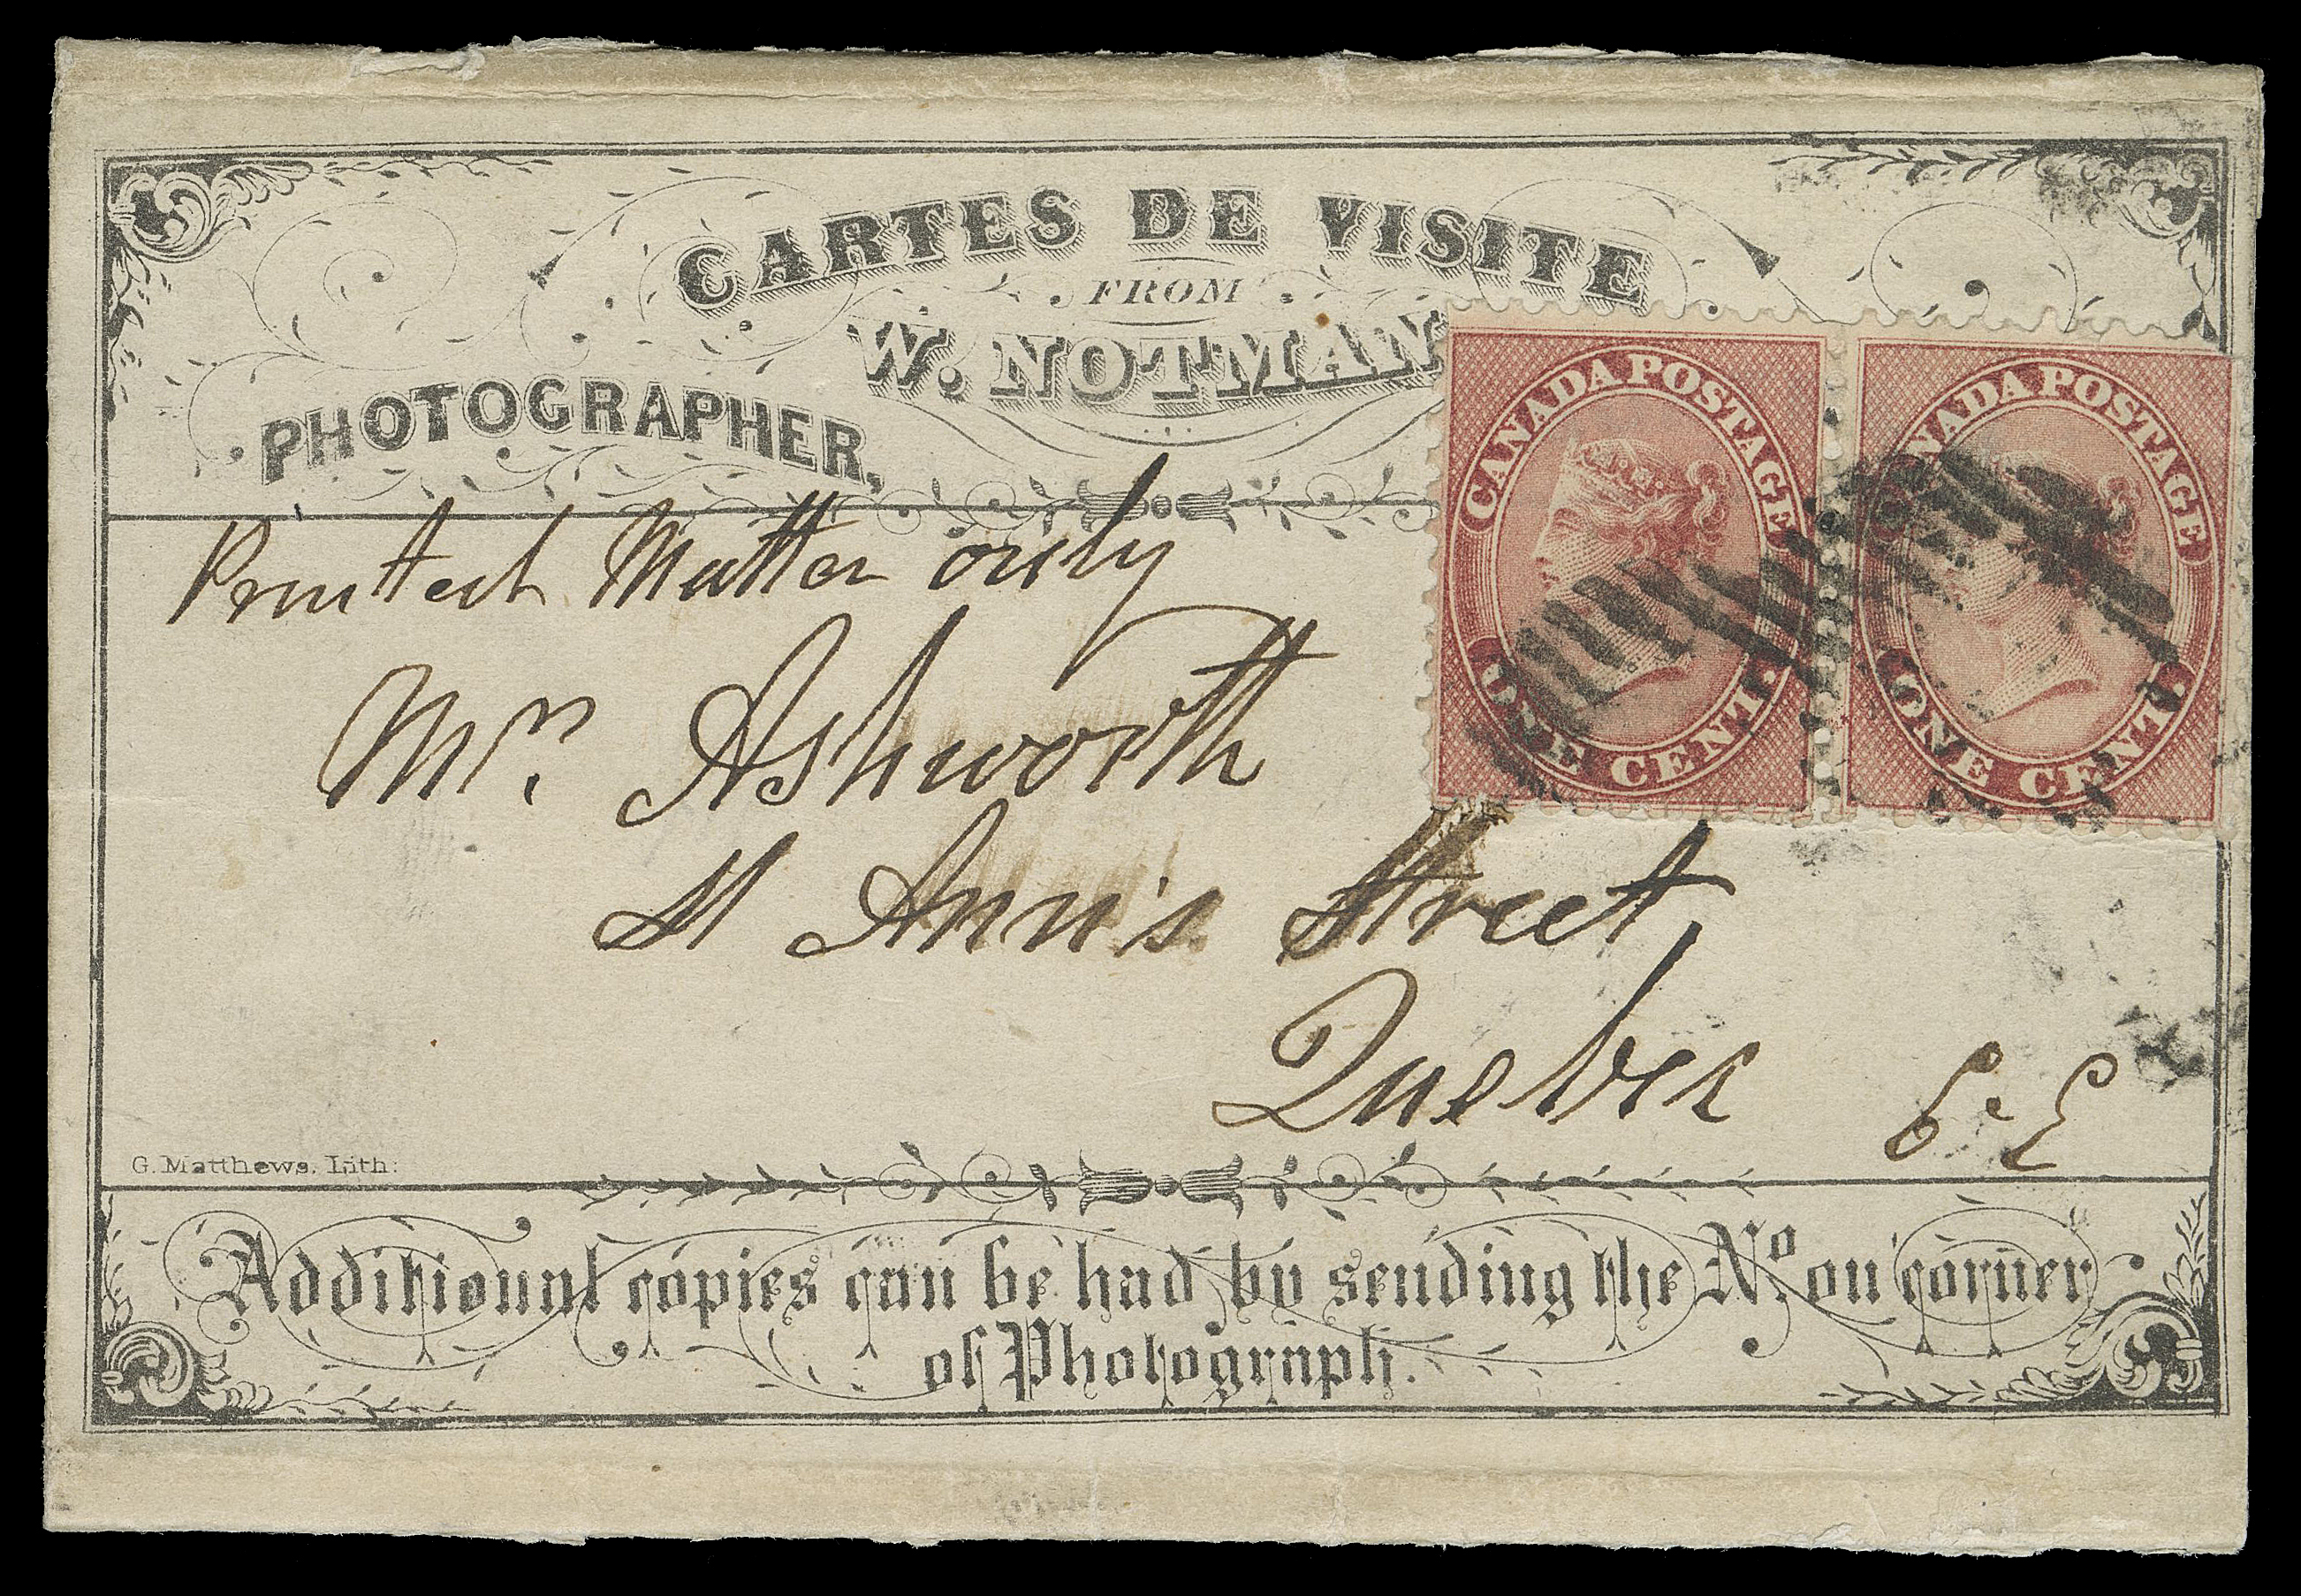 HALF PENNY AND ONE CENT  Undated (circa. early 1860s) Photographer W. Notman "Cartes de Visite", Montreal pre-printed card stock advertising wrapper addressed to Quebec, unsealed at sides (originally containing photographs), bearing a nicely centered horizontal pair of 1c deep rose, perf 11¾, small fault at top right, cancelled by mute grids, paying double weight (up to 2 ounces) non-letter unsealed domestic printed matter rate, VF and very attractive. (Unitrade 14b)

Provenance: Charles deVolpi, Sissons Sale 247, April 1966; Lot 47
Unknown provenance, Maresch Sale 94, November 1977; Lot 141
